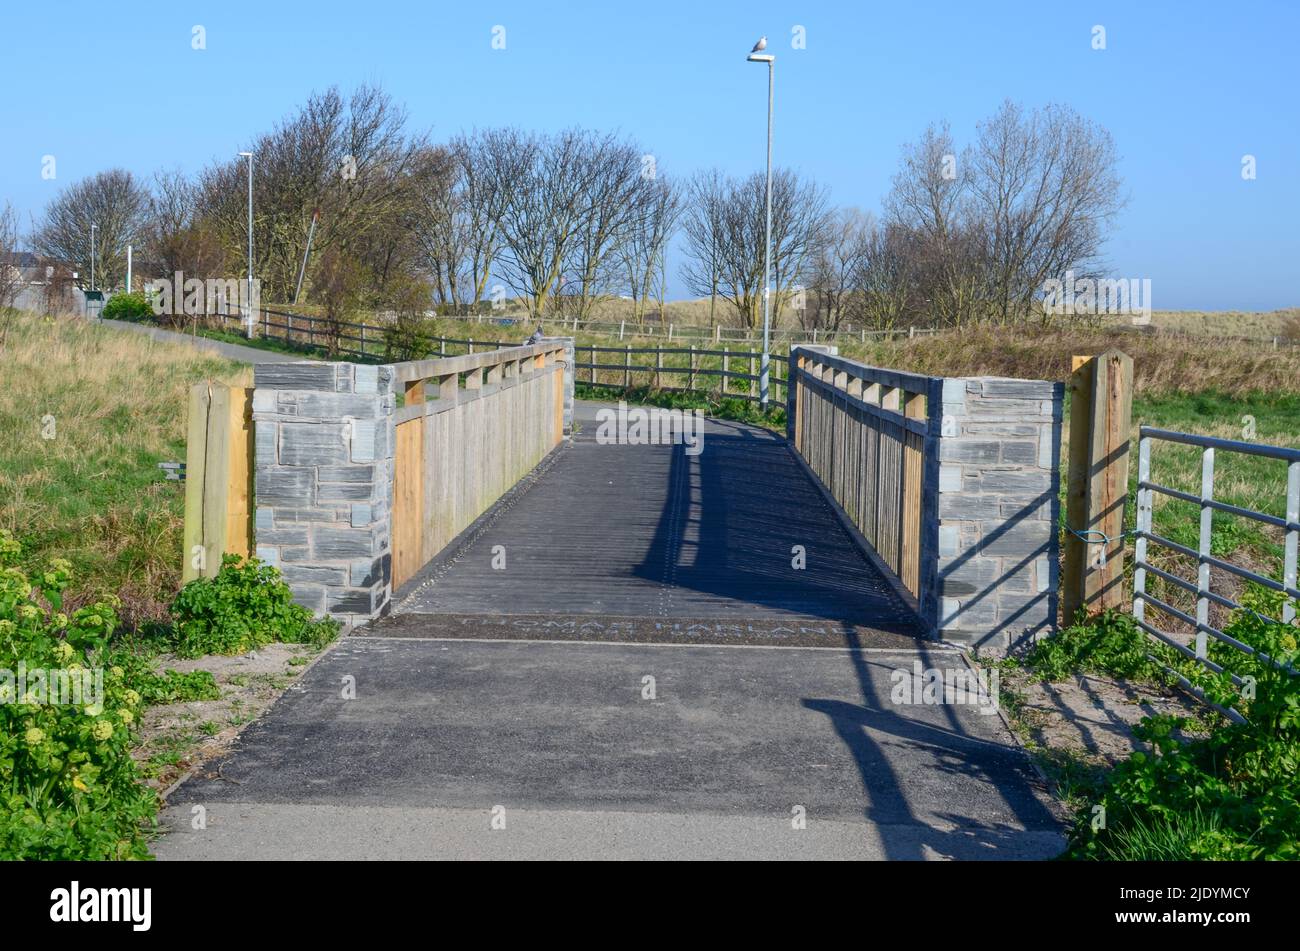 Prestatyn, UK: Mar 27, 2022: A wooden footbridge on the outskirts of Prestatyn is dedicated to Thomas Harland who lost his life in a road accident whi Stock Photo